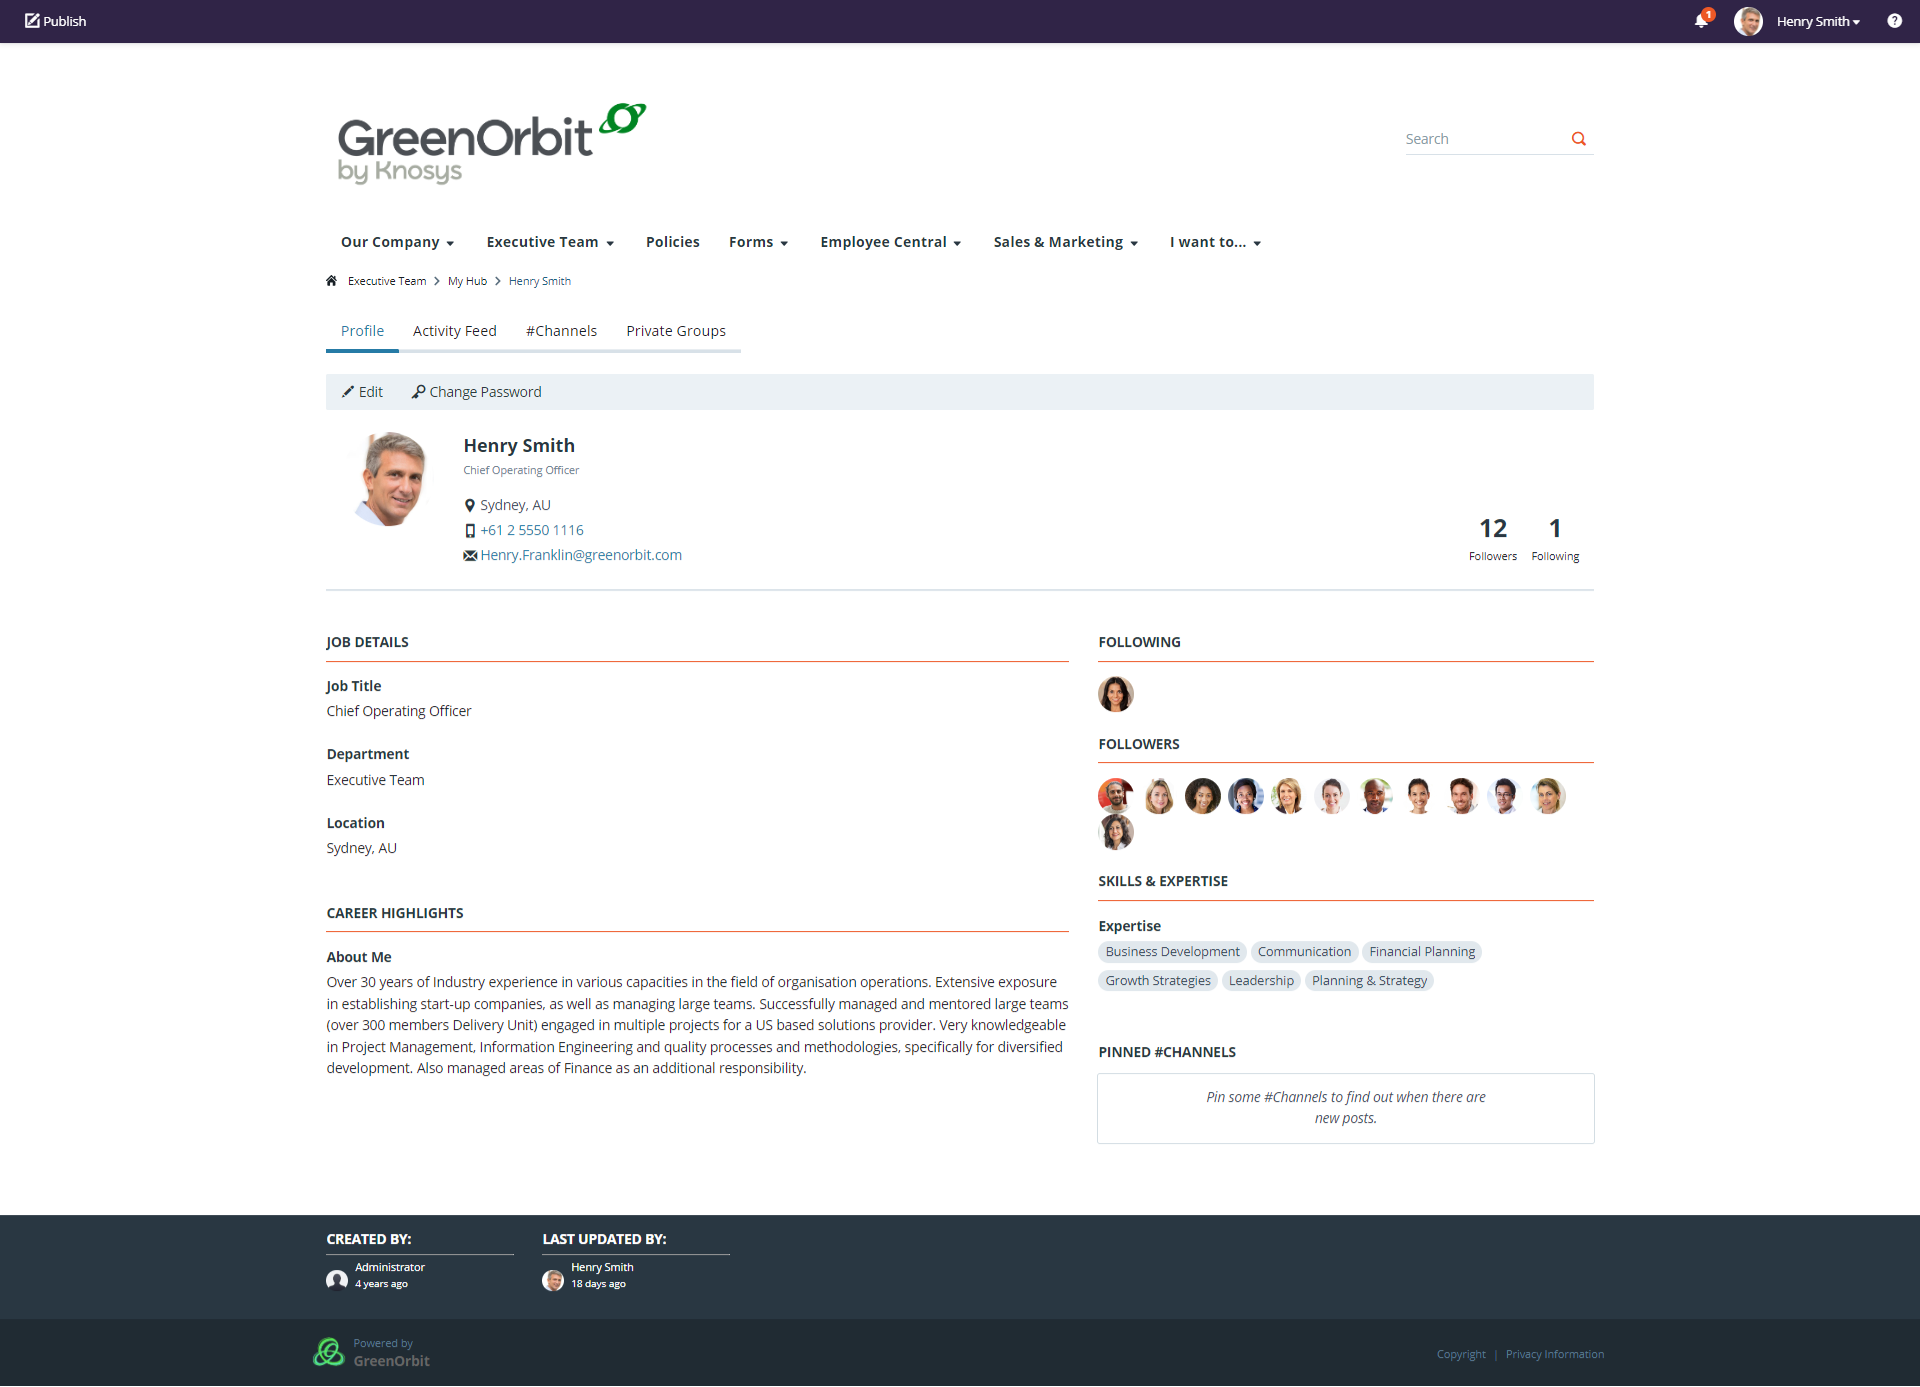 Leverage the power of your people with detailed staff profiles. Employees can self-manage information by sharing their responsibilities, experience, and areas of expertise – making it easy to build project teams and foster collaboration.